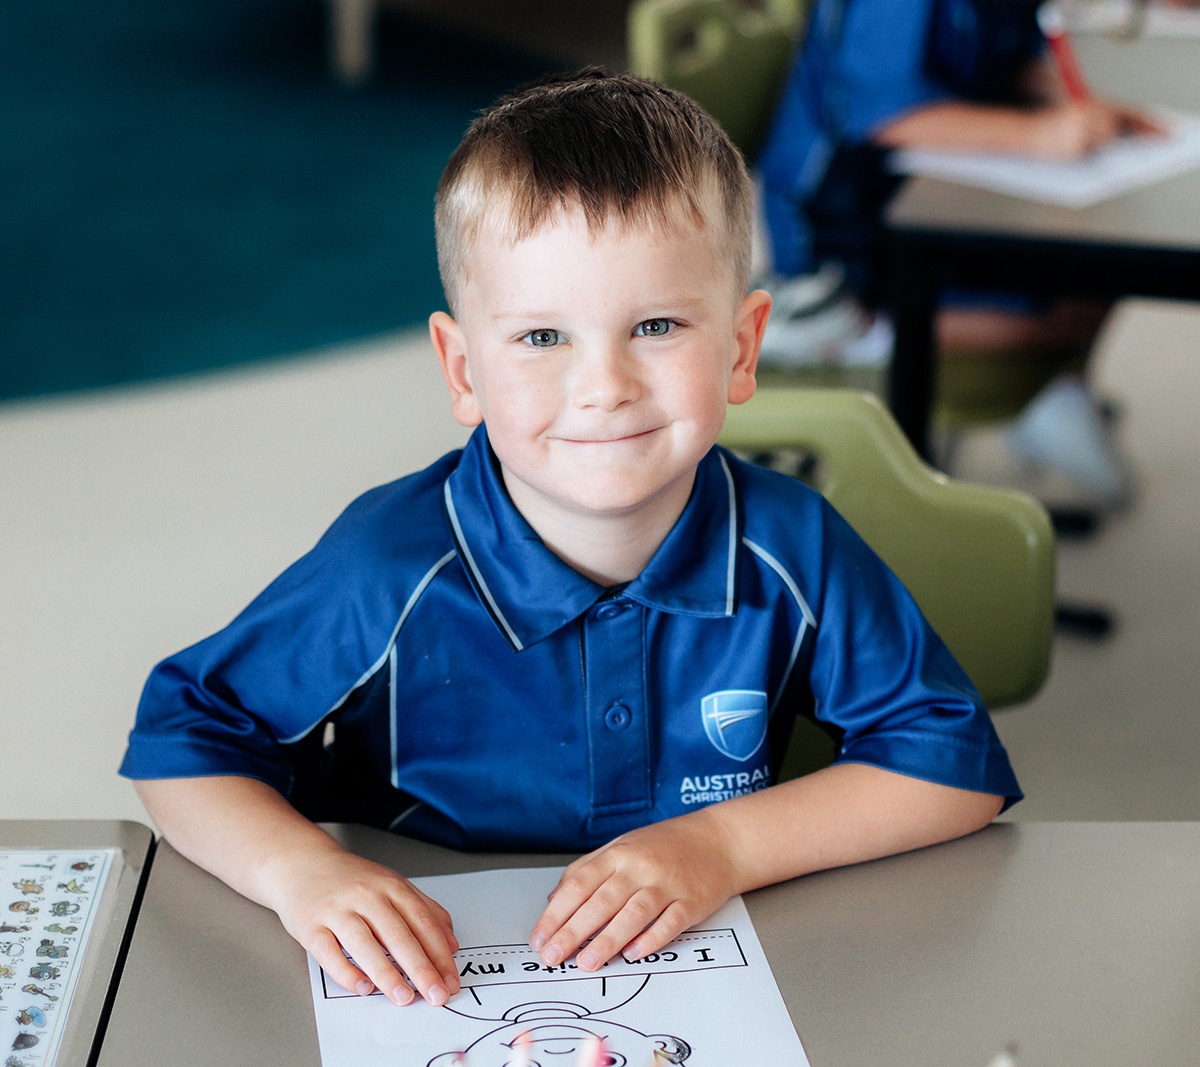 kindergarten boy smiling at camera while colouring in